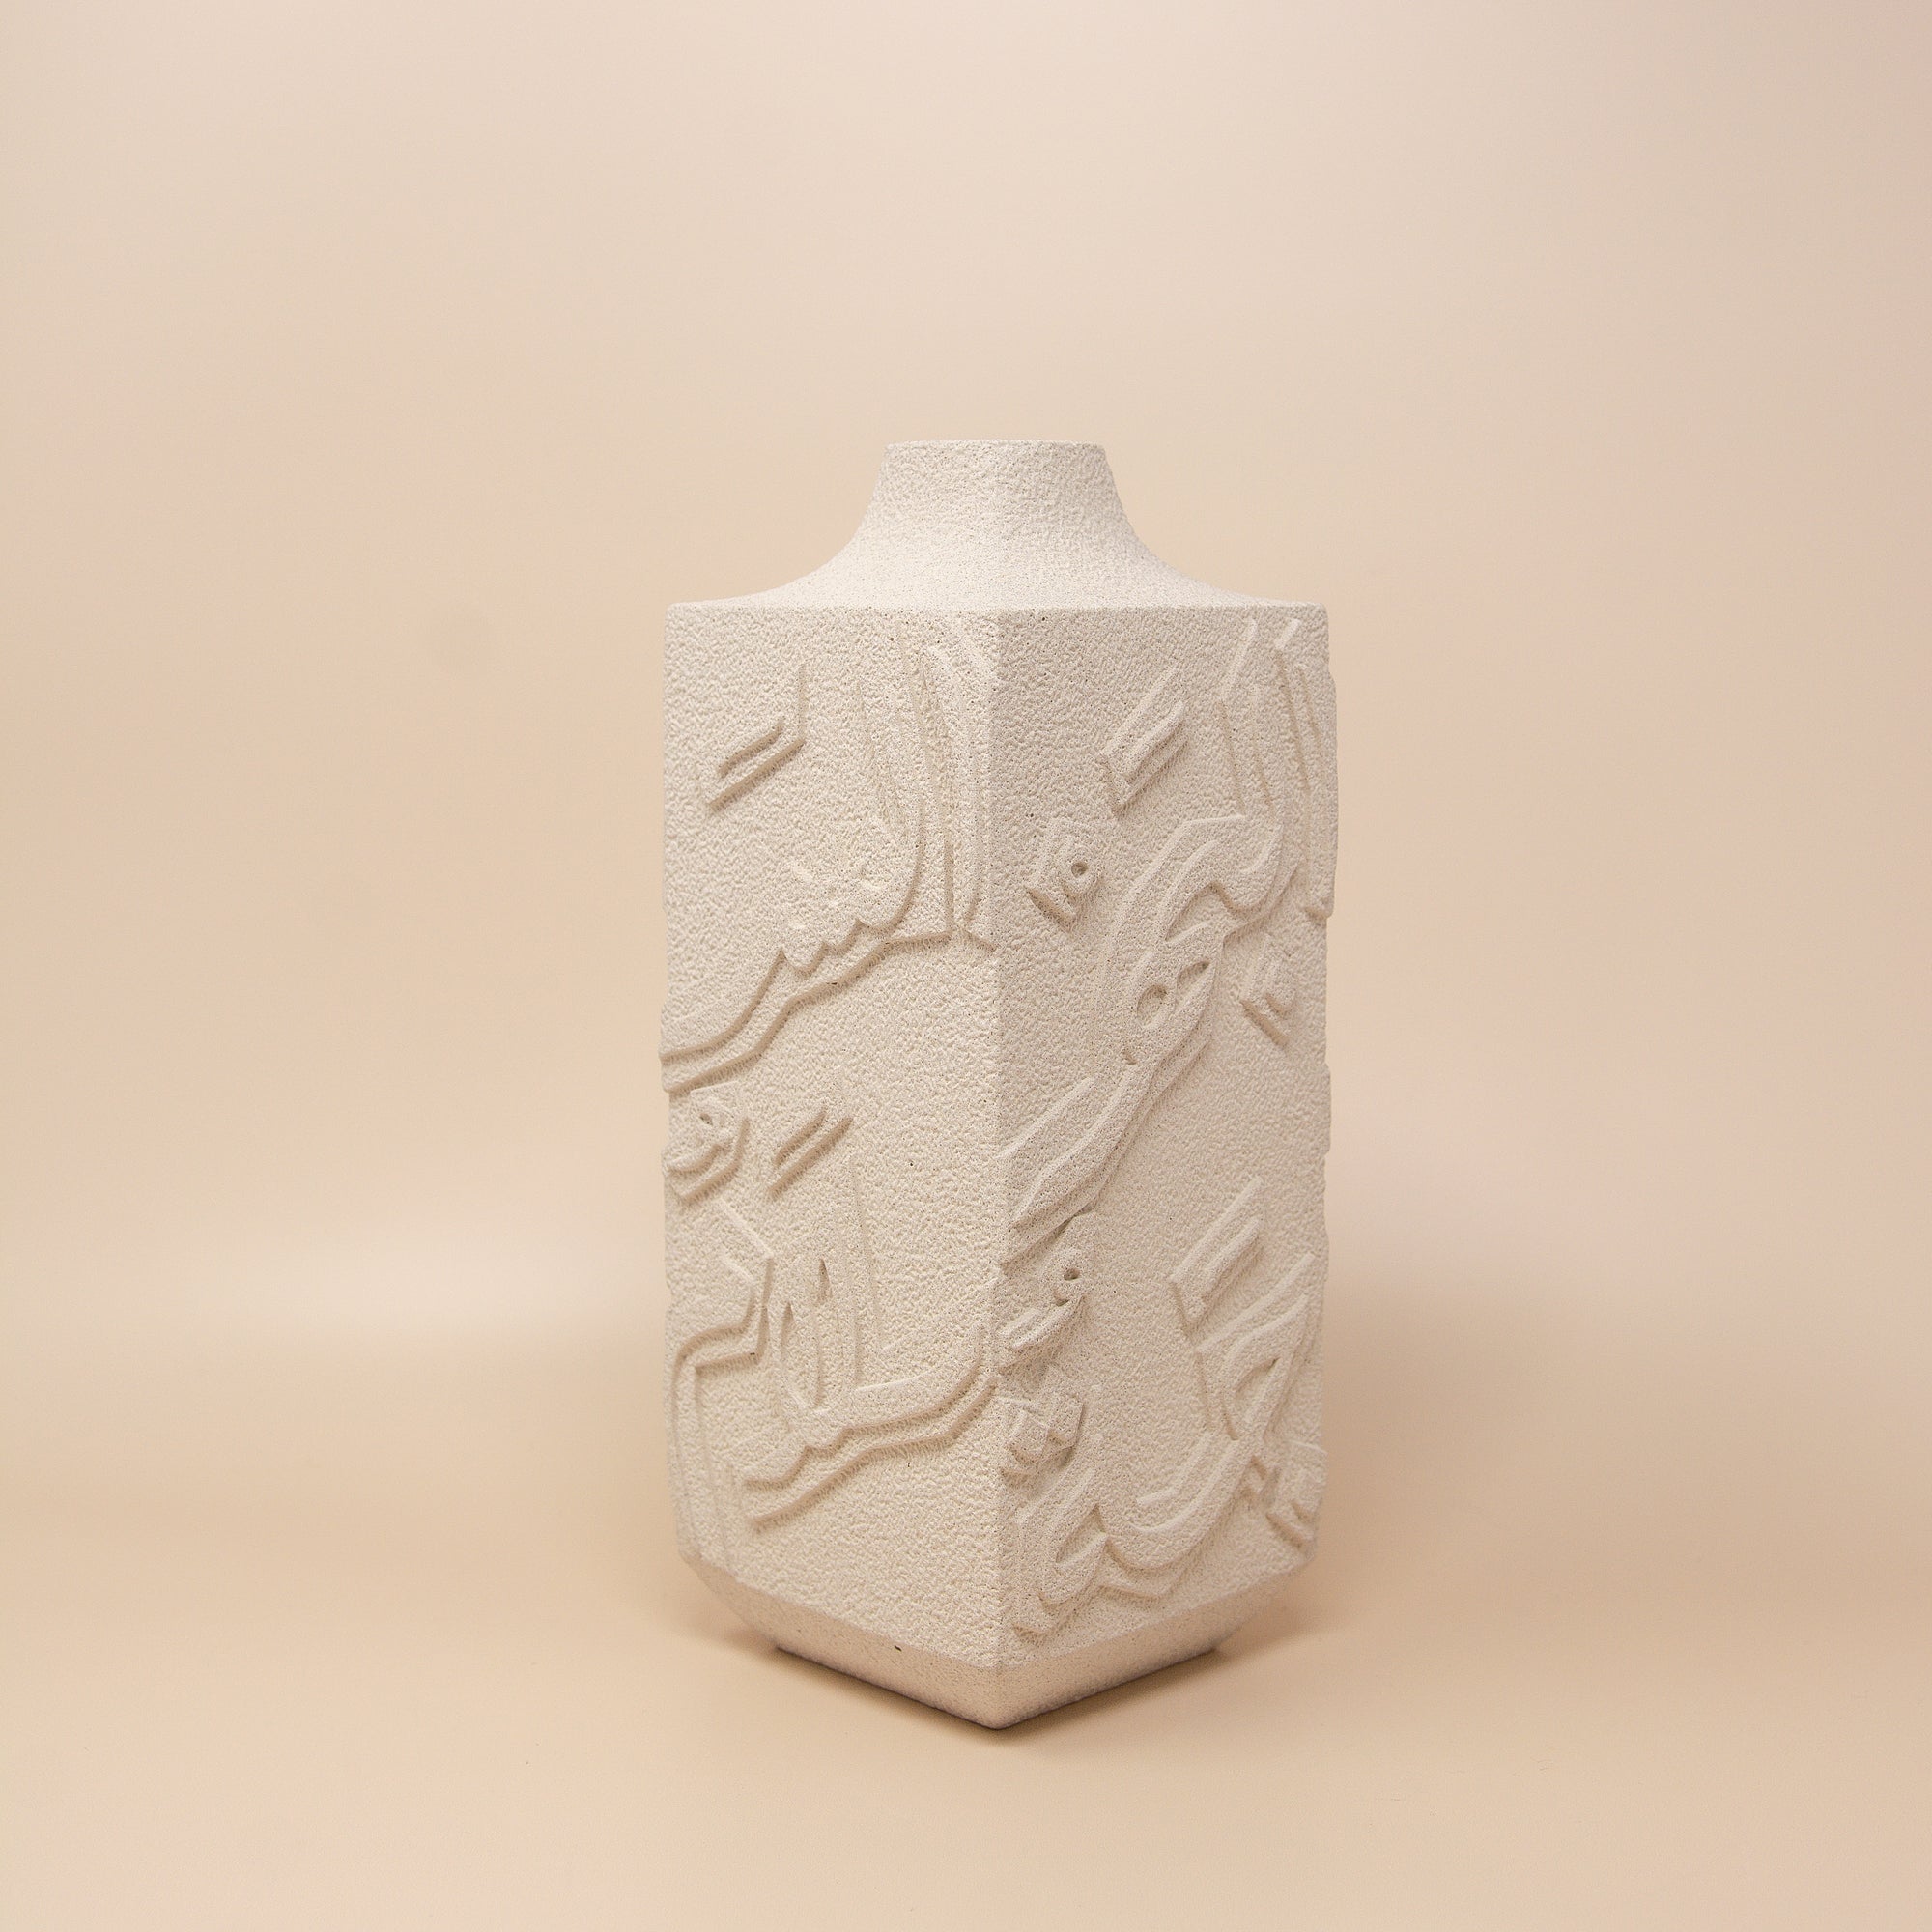 Artisan Handcrafted Calligraphy Vase